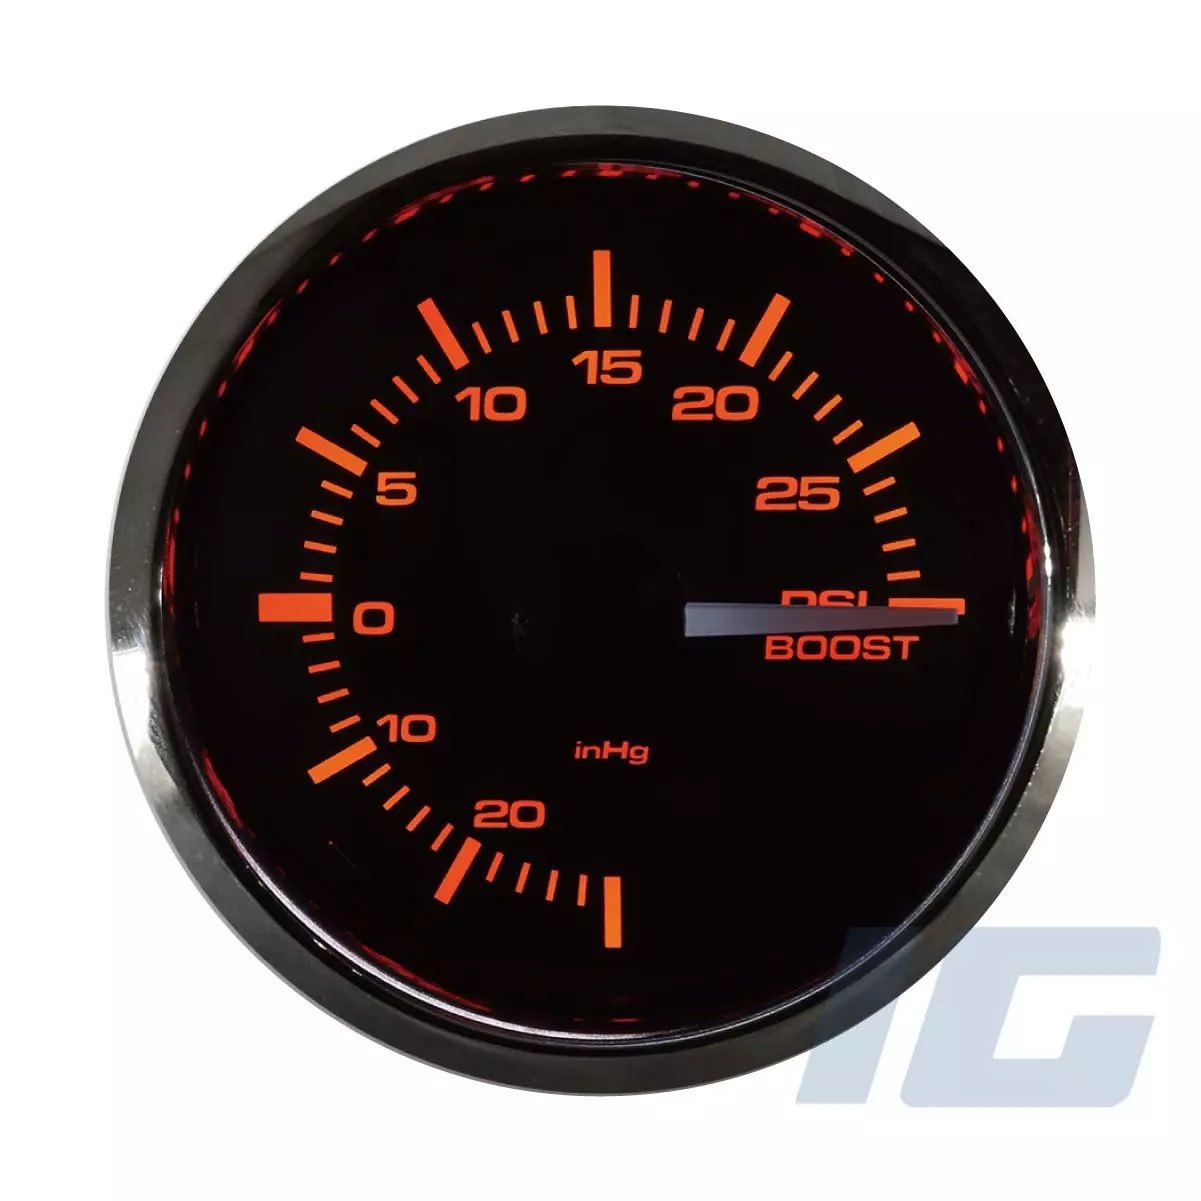 igauge, DIGITAL PSI BAR TURBO BOOST VACUUM GAUGE WITH INSTALL KIT T-FITTING : MECHANICAL, ELECTRONIC, SUPERCHARGER